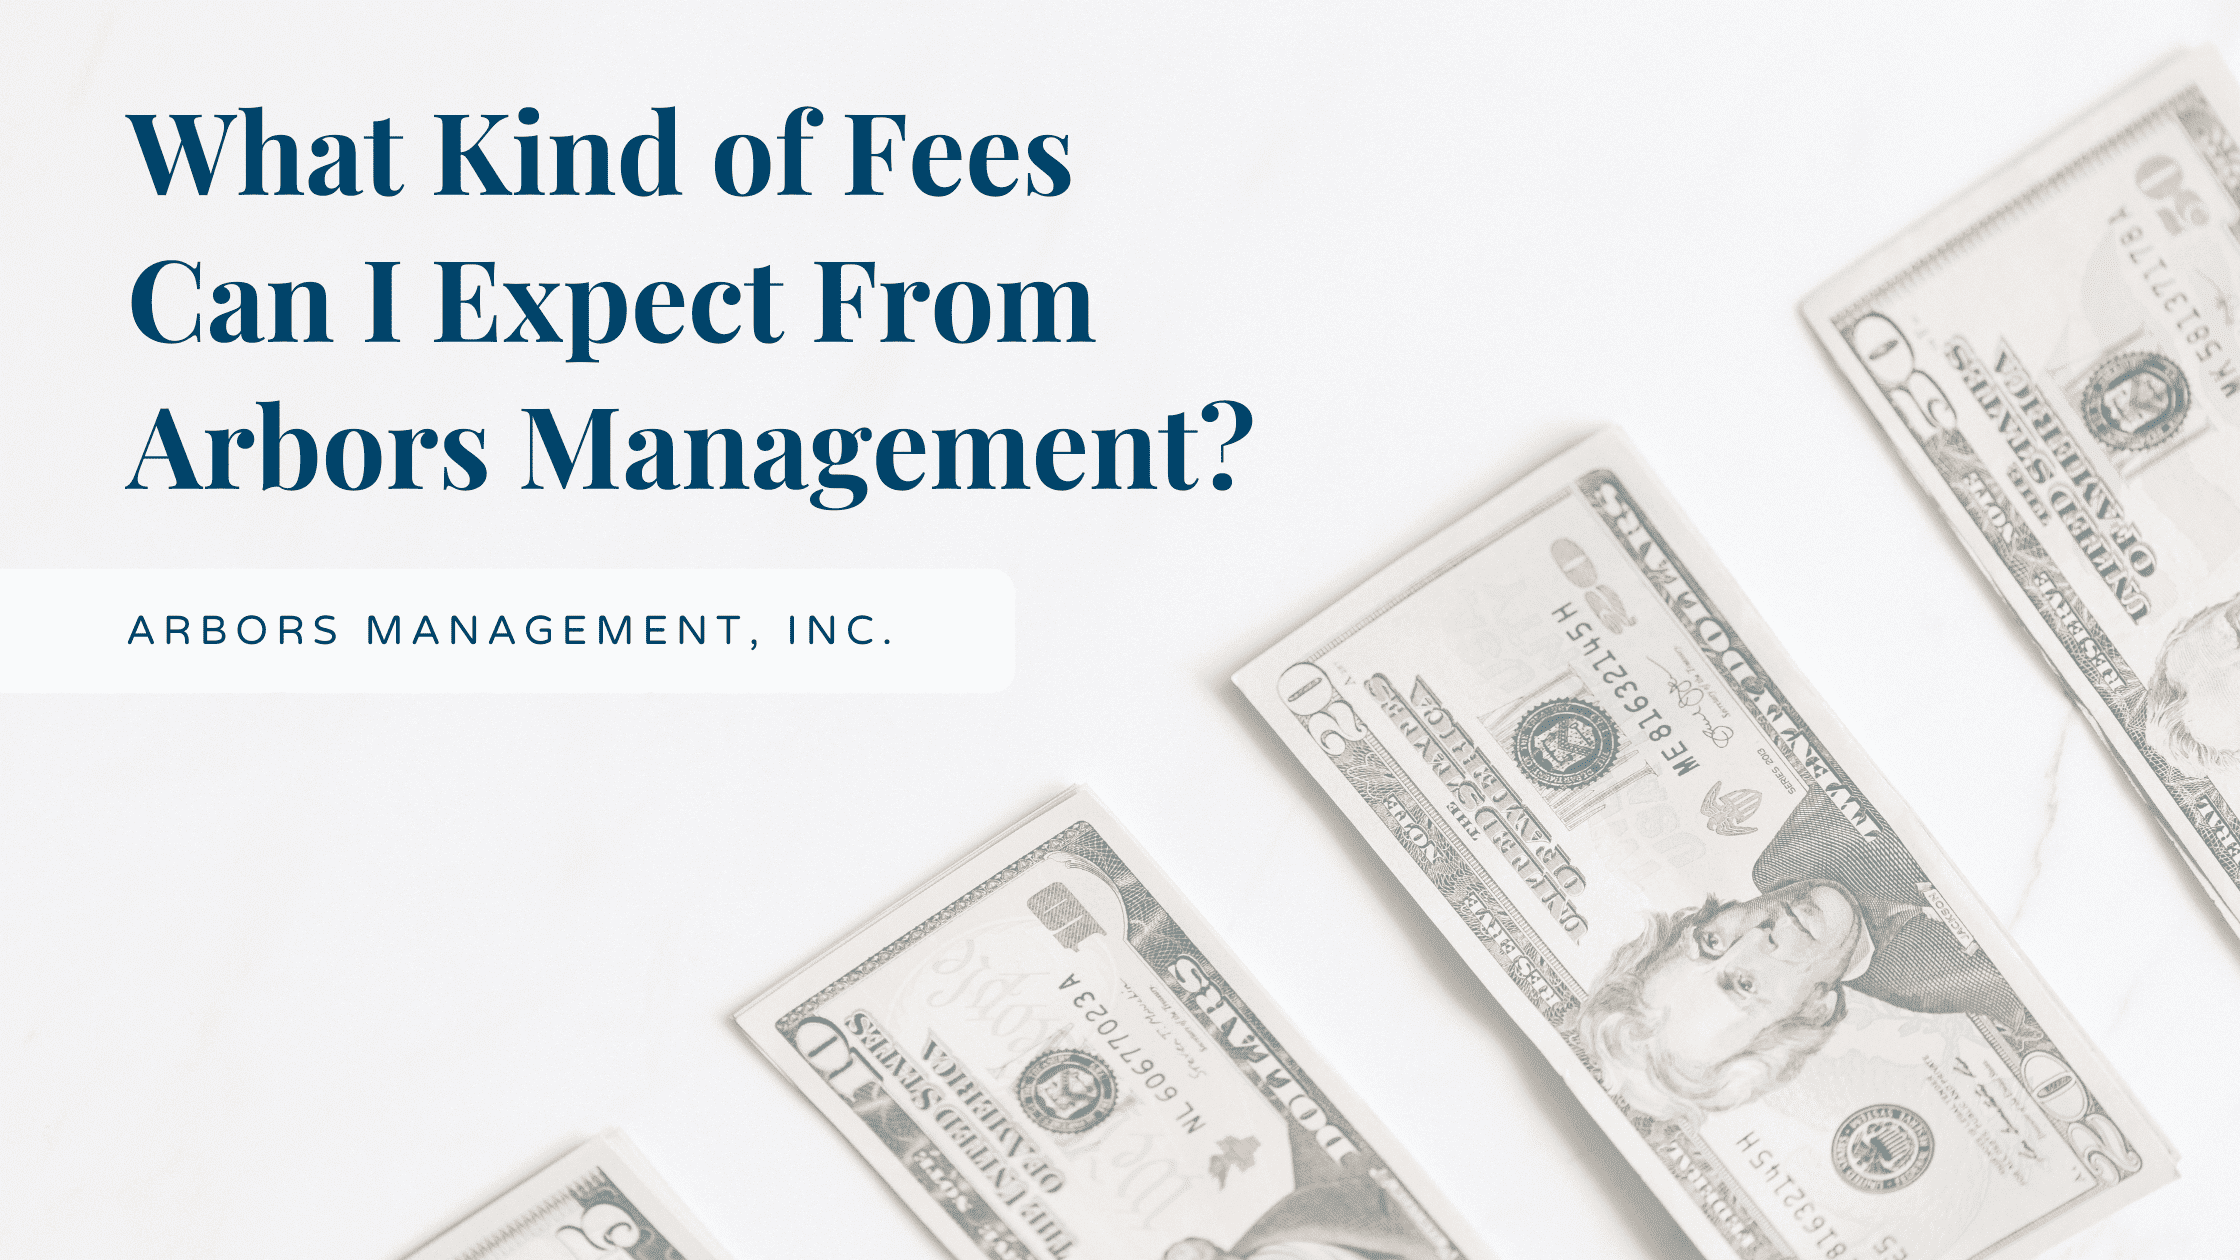 What Kind of Fees Can I Expect From Arbors Management?